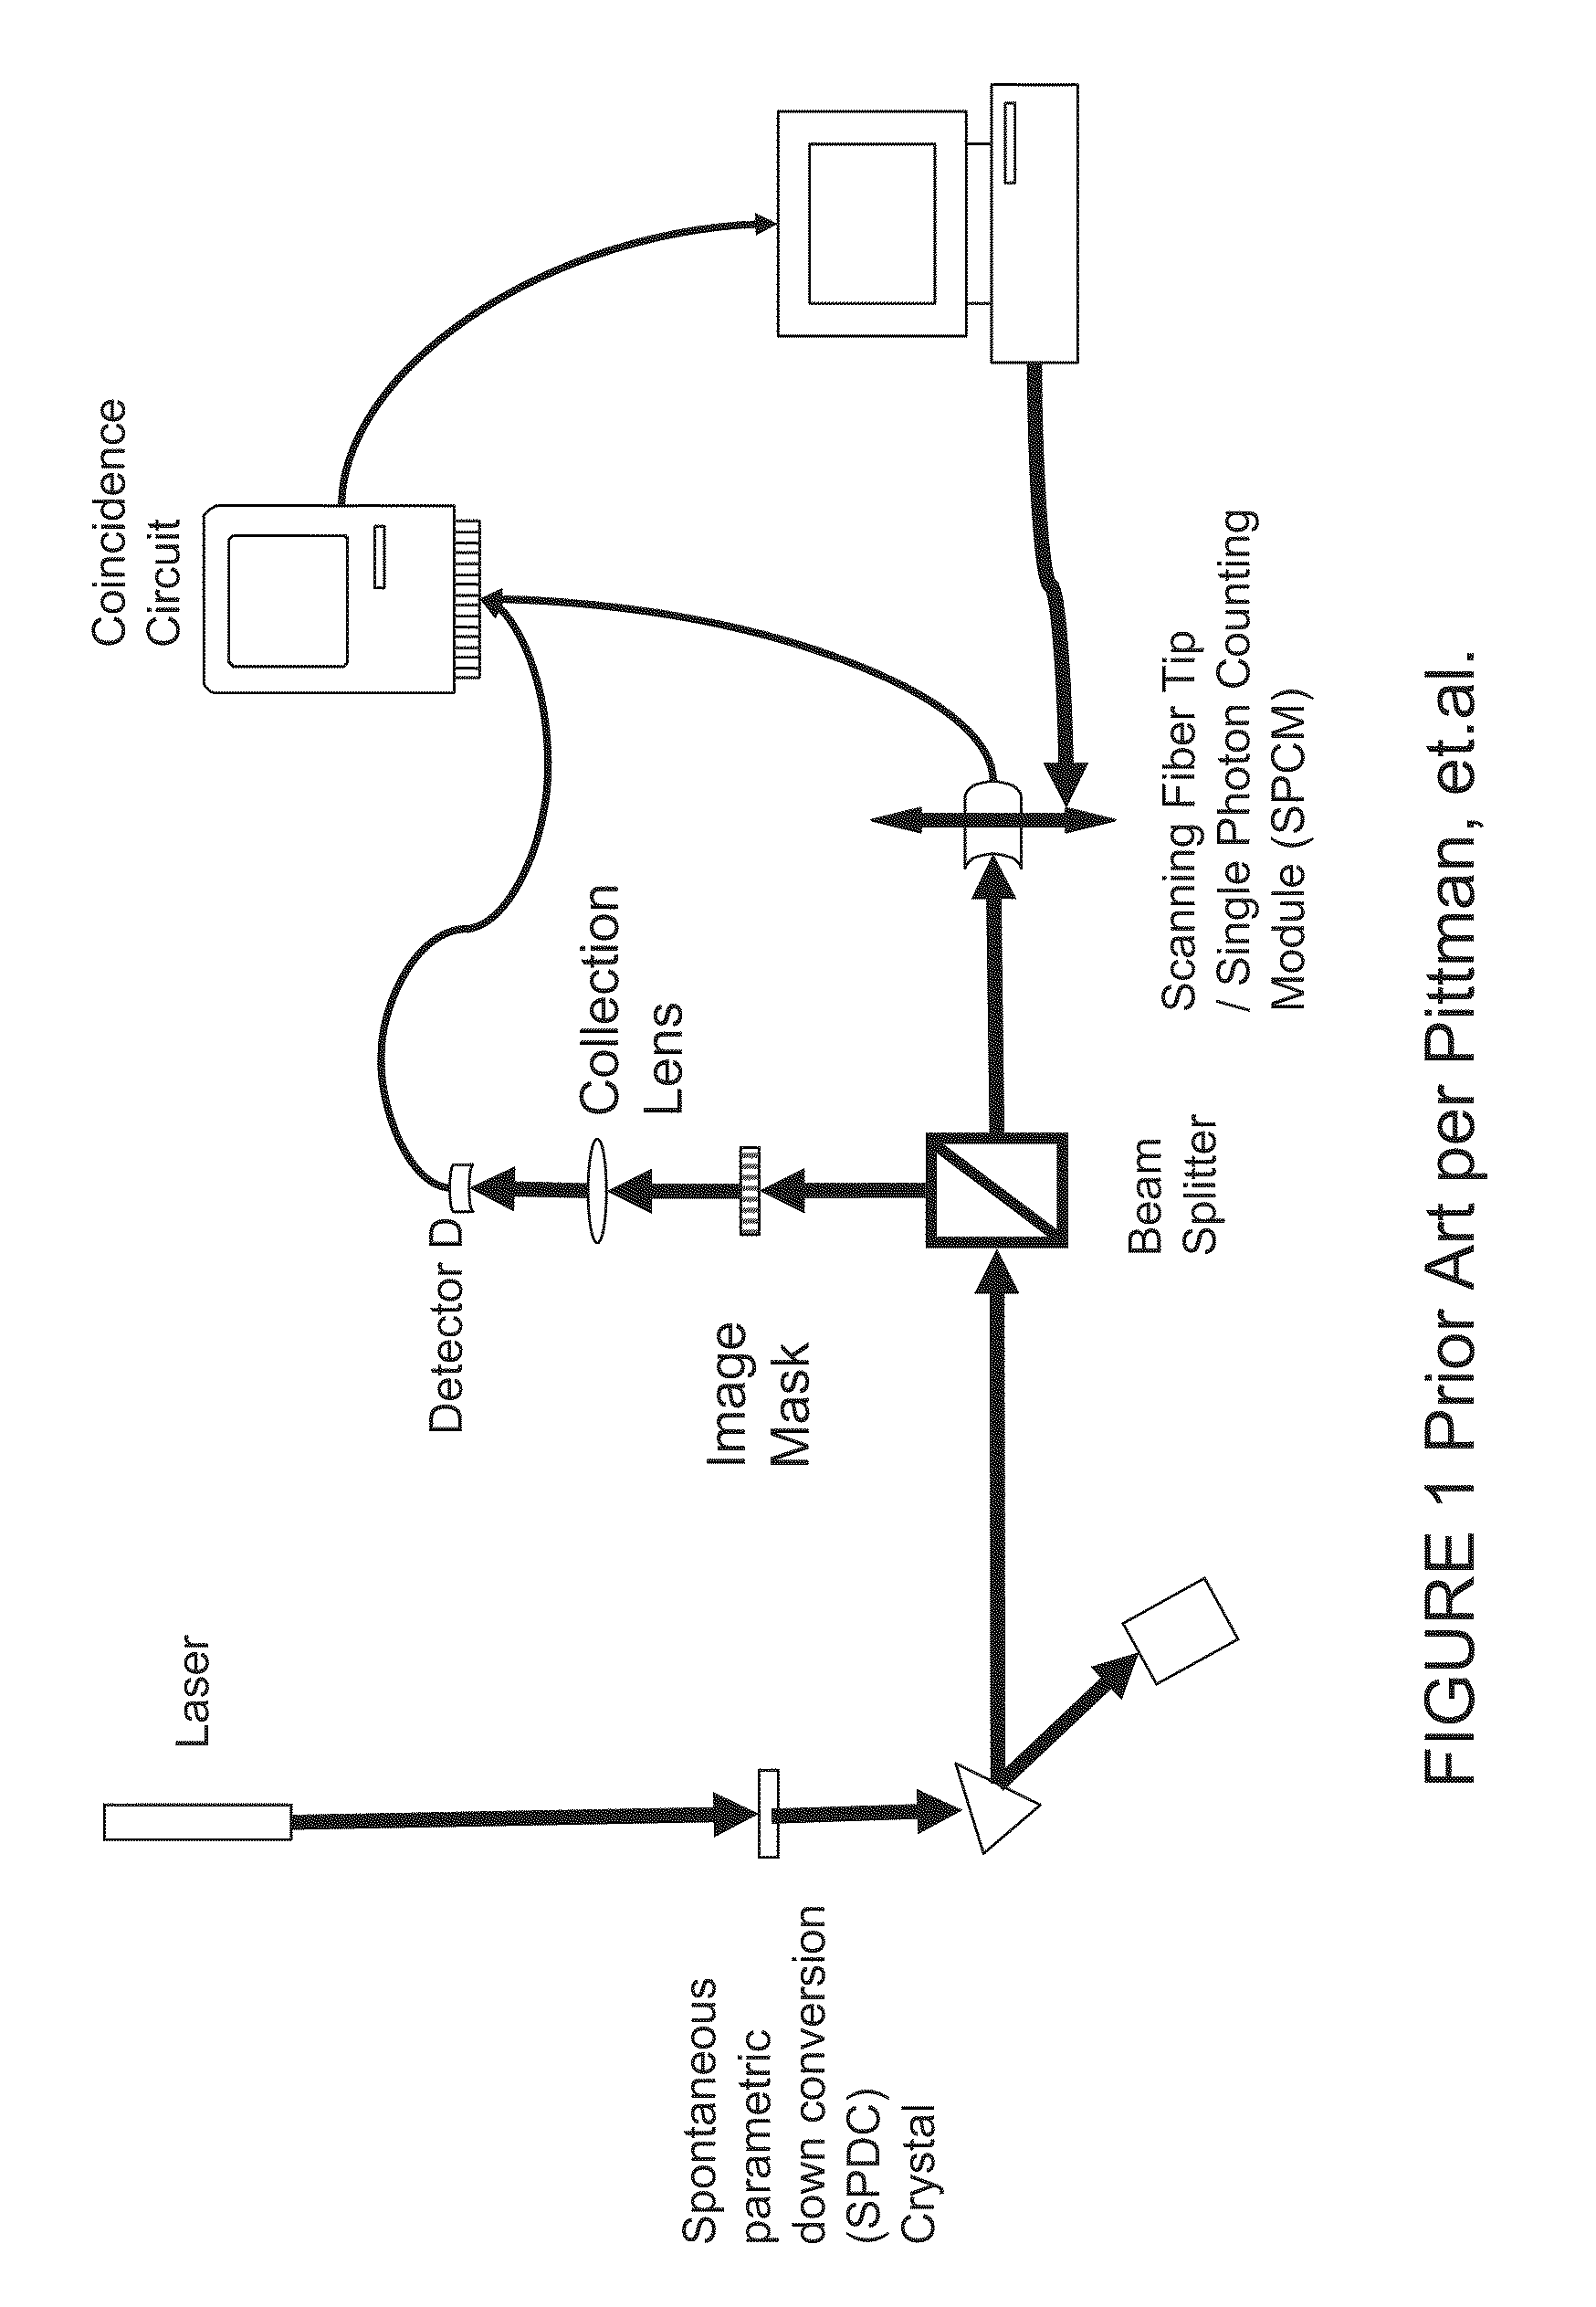 Method and system for observing a subject at a first location based upon quantum properties measured at a second location